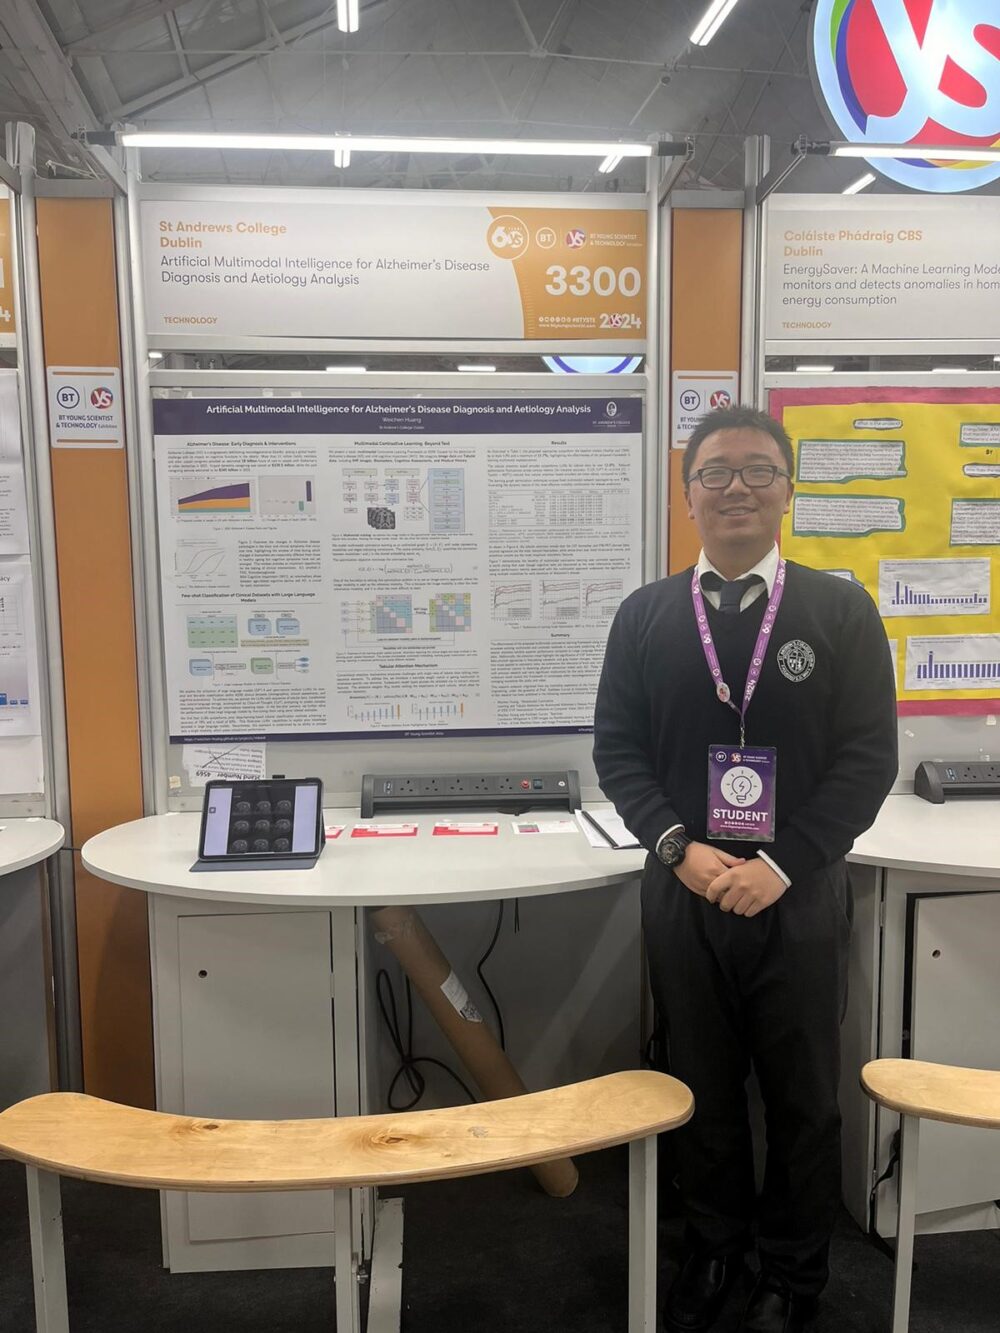 BT Young Scientist IRC winner pictured by his poster